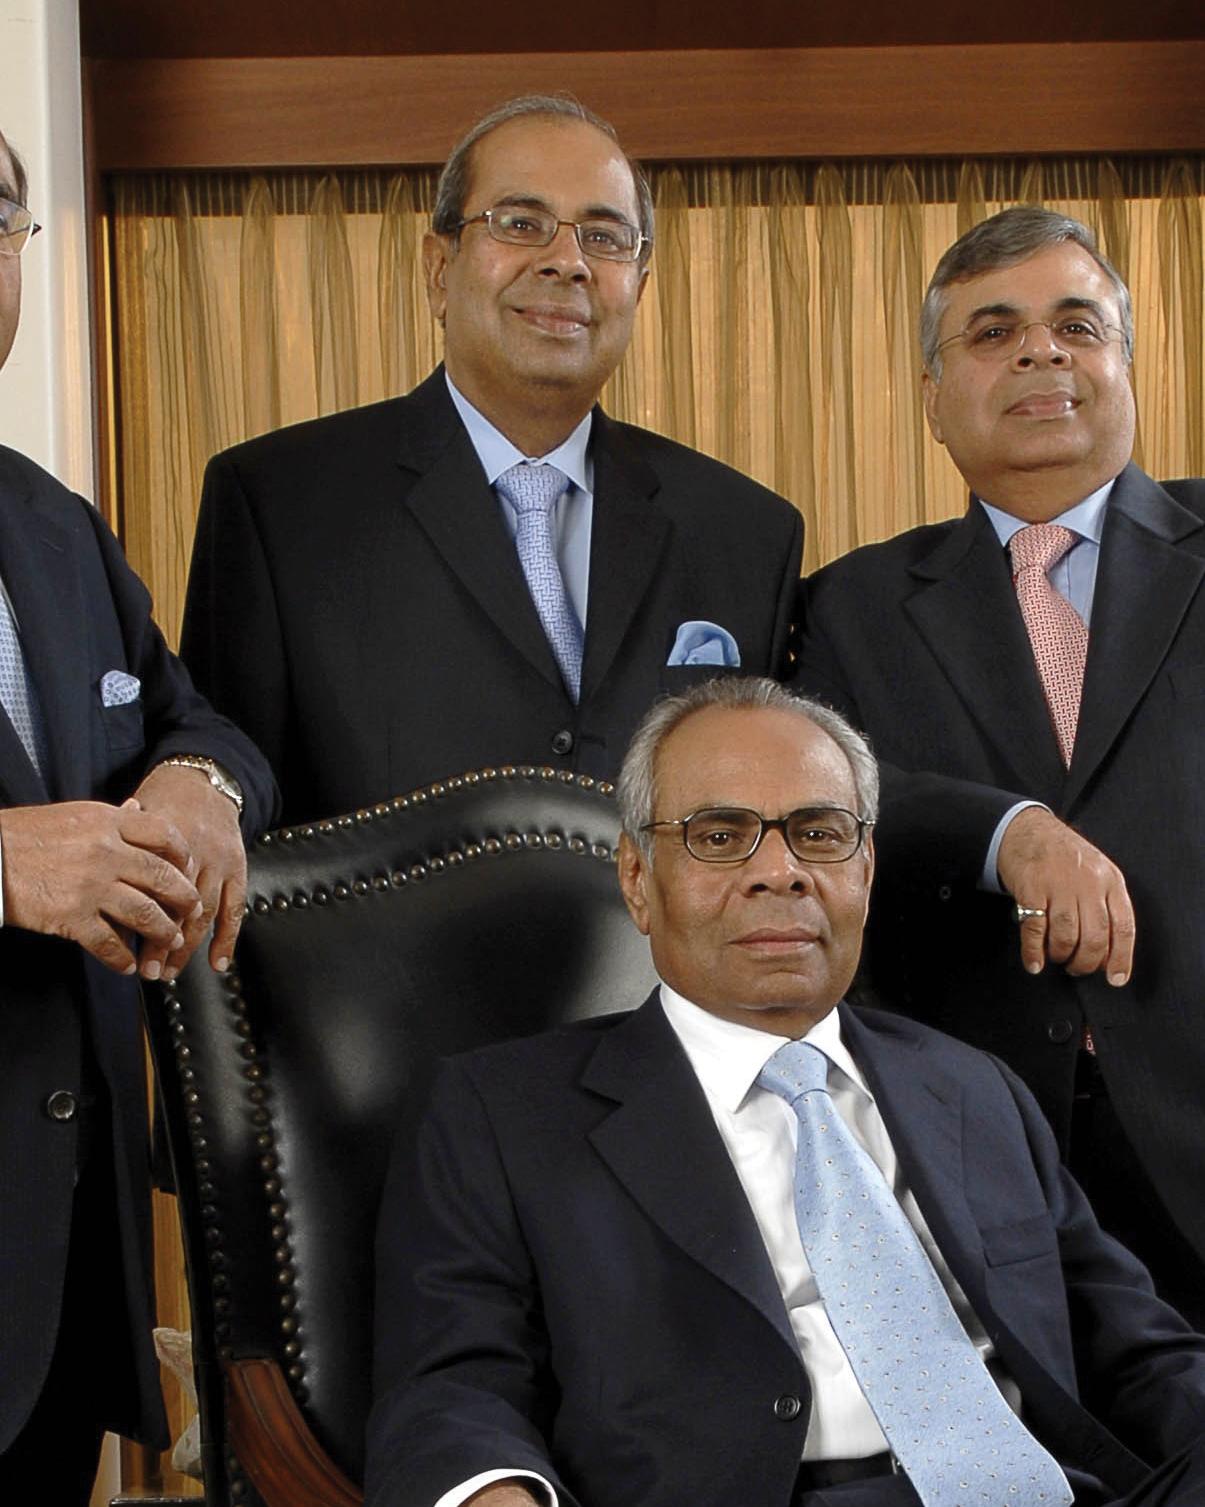 SP Hinduja, seated, with his brothers Gopichand, Prakash and Ashok Hinduja in 2010 in Mumbai, where the family met at the end of every year